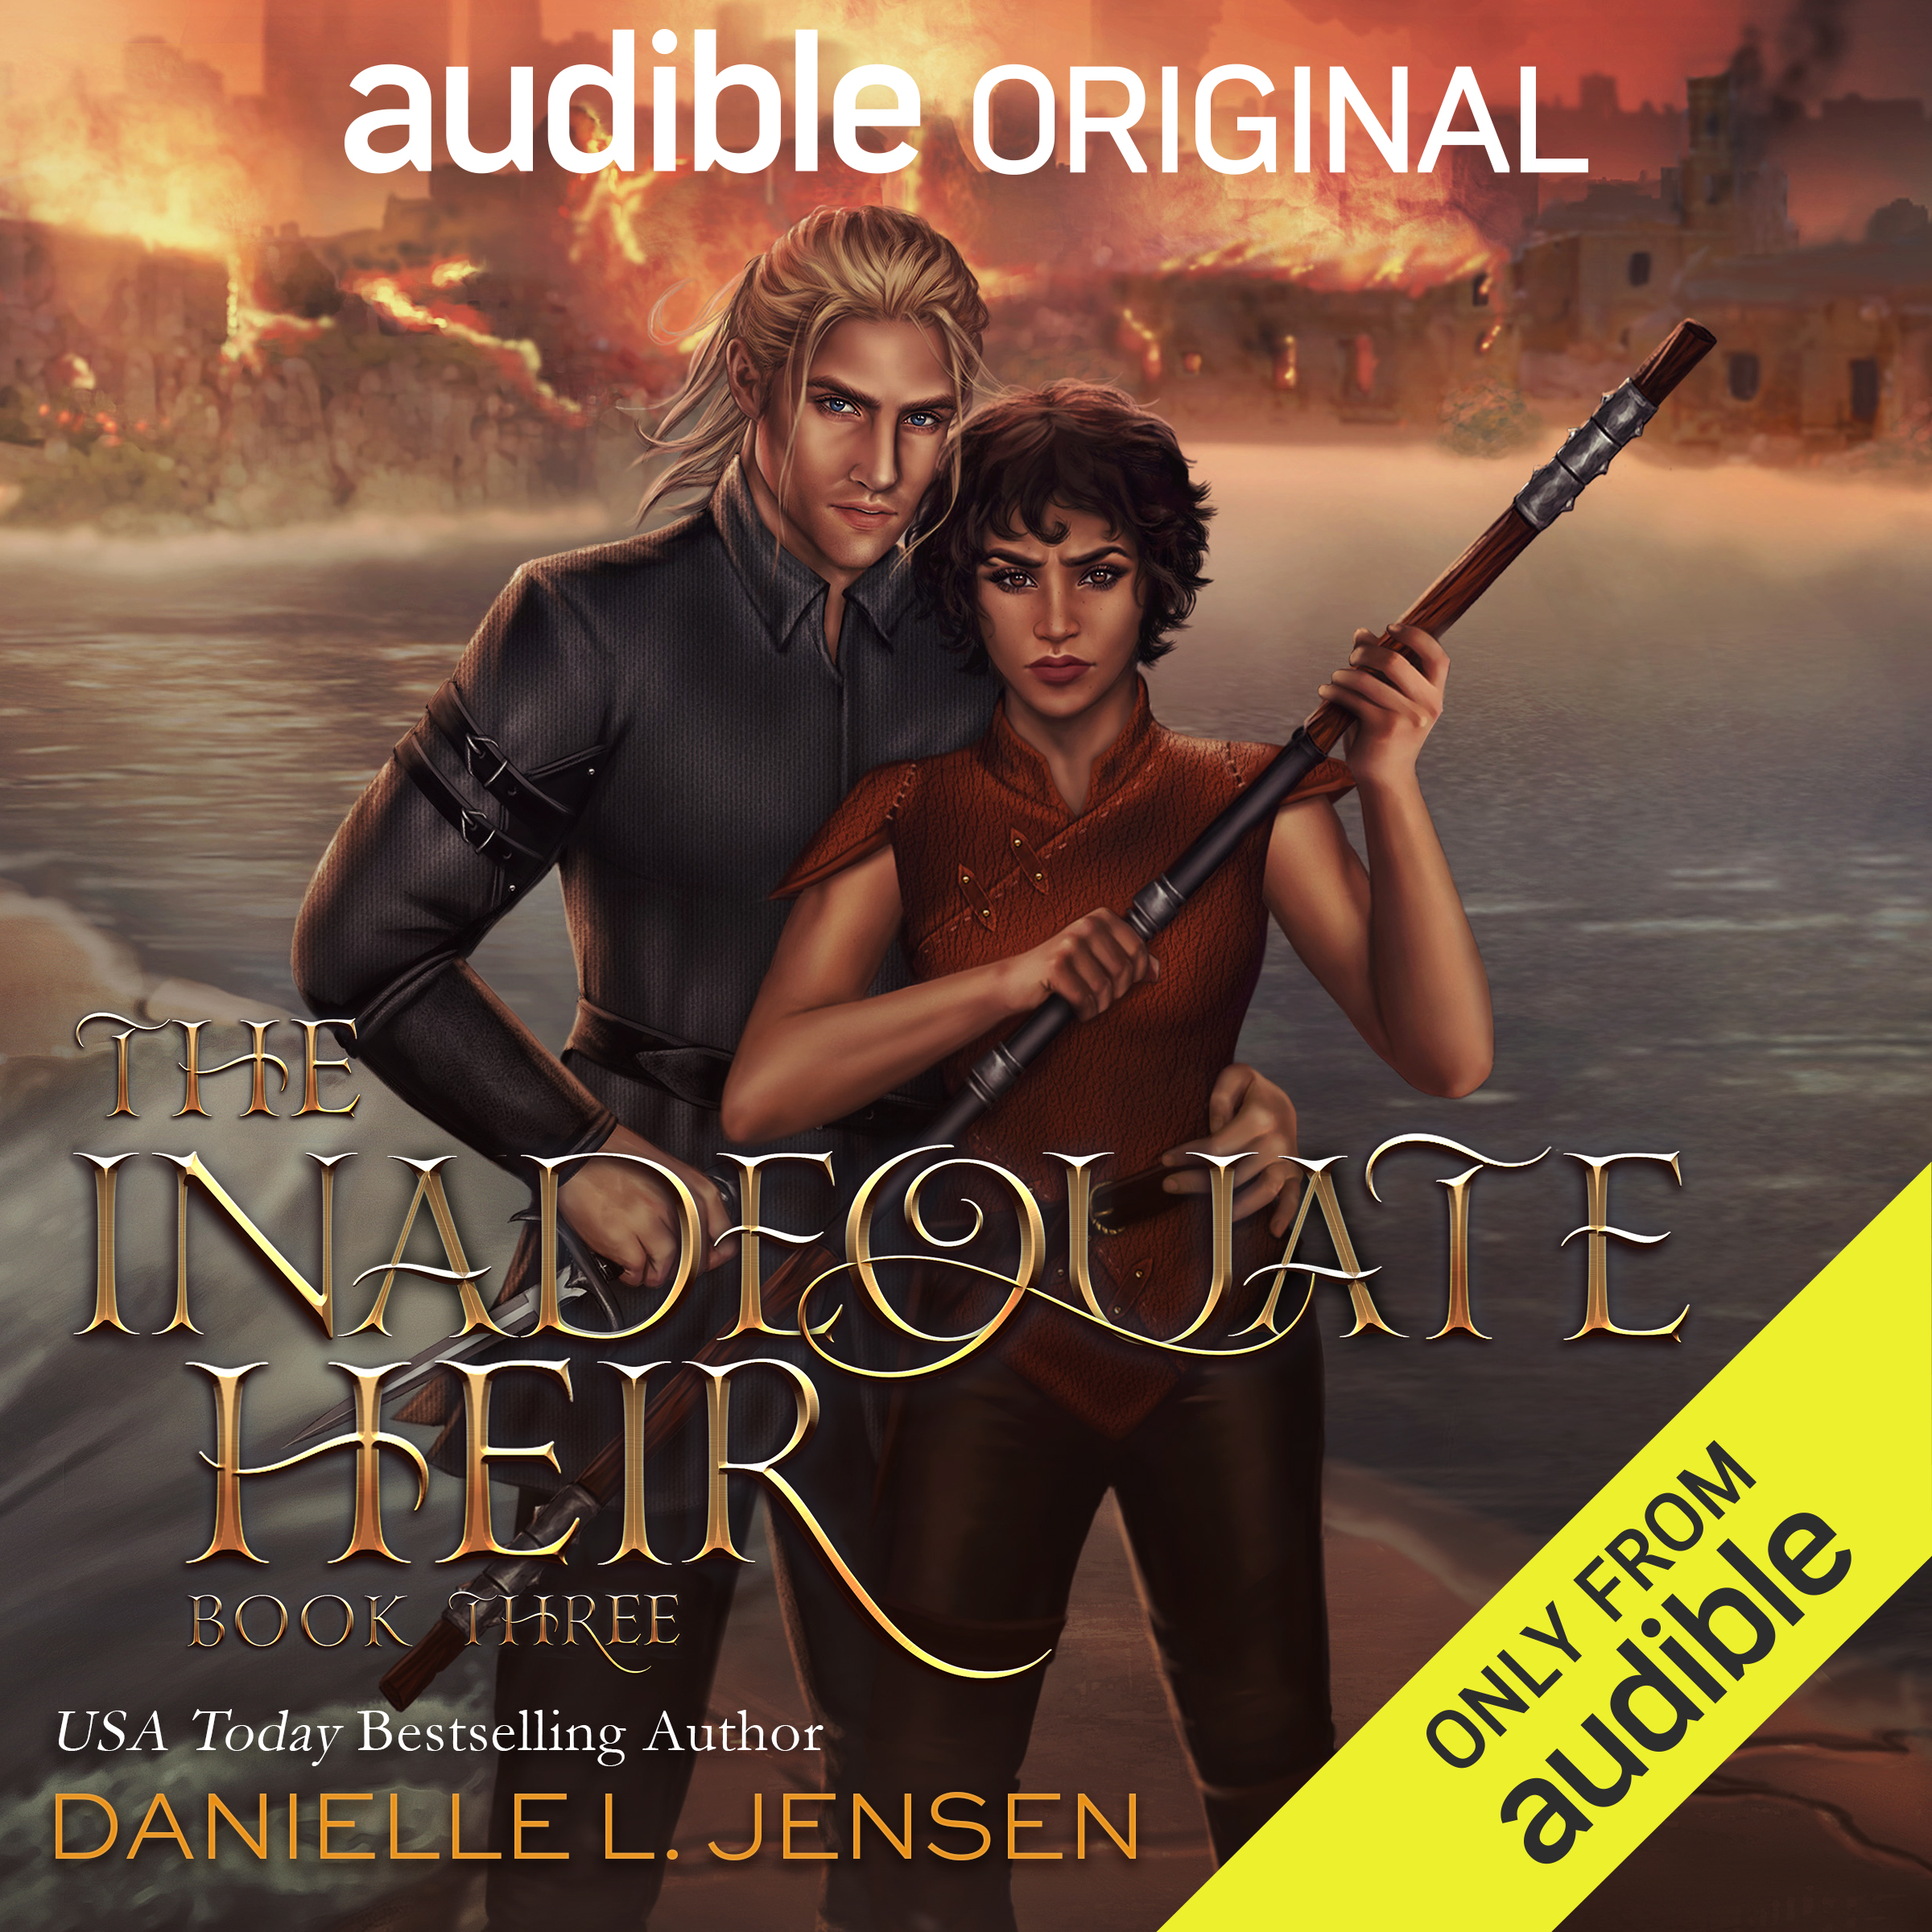 Inadequate_Heir_Audible Cover FINAL